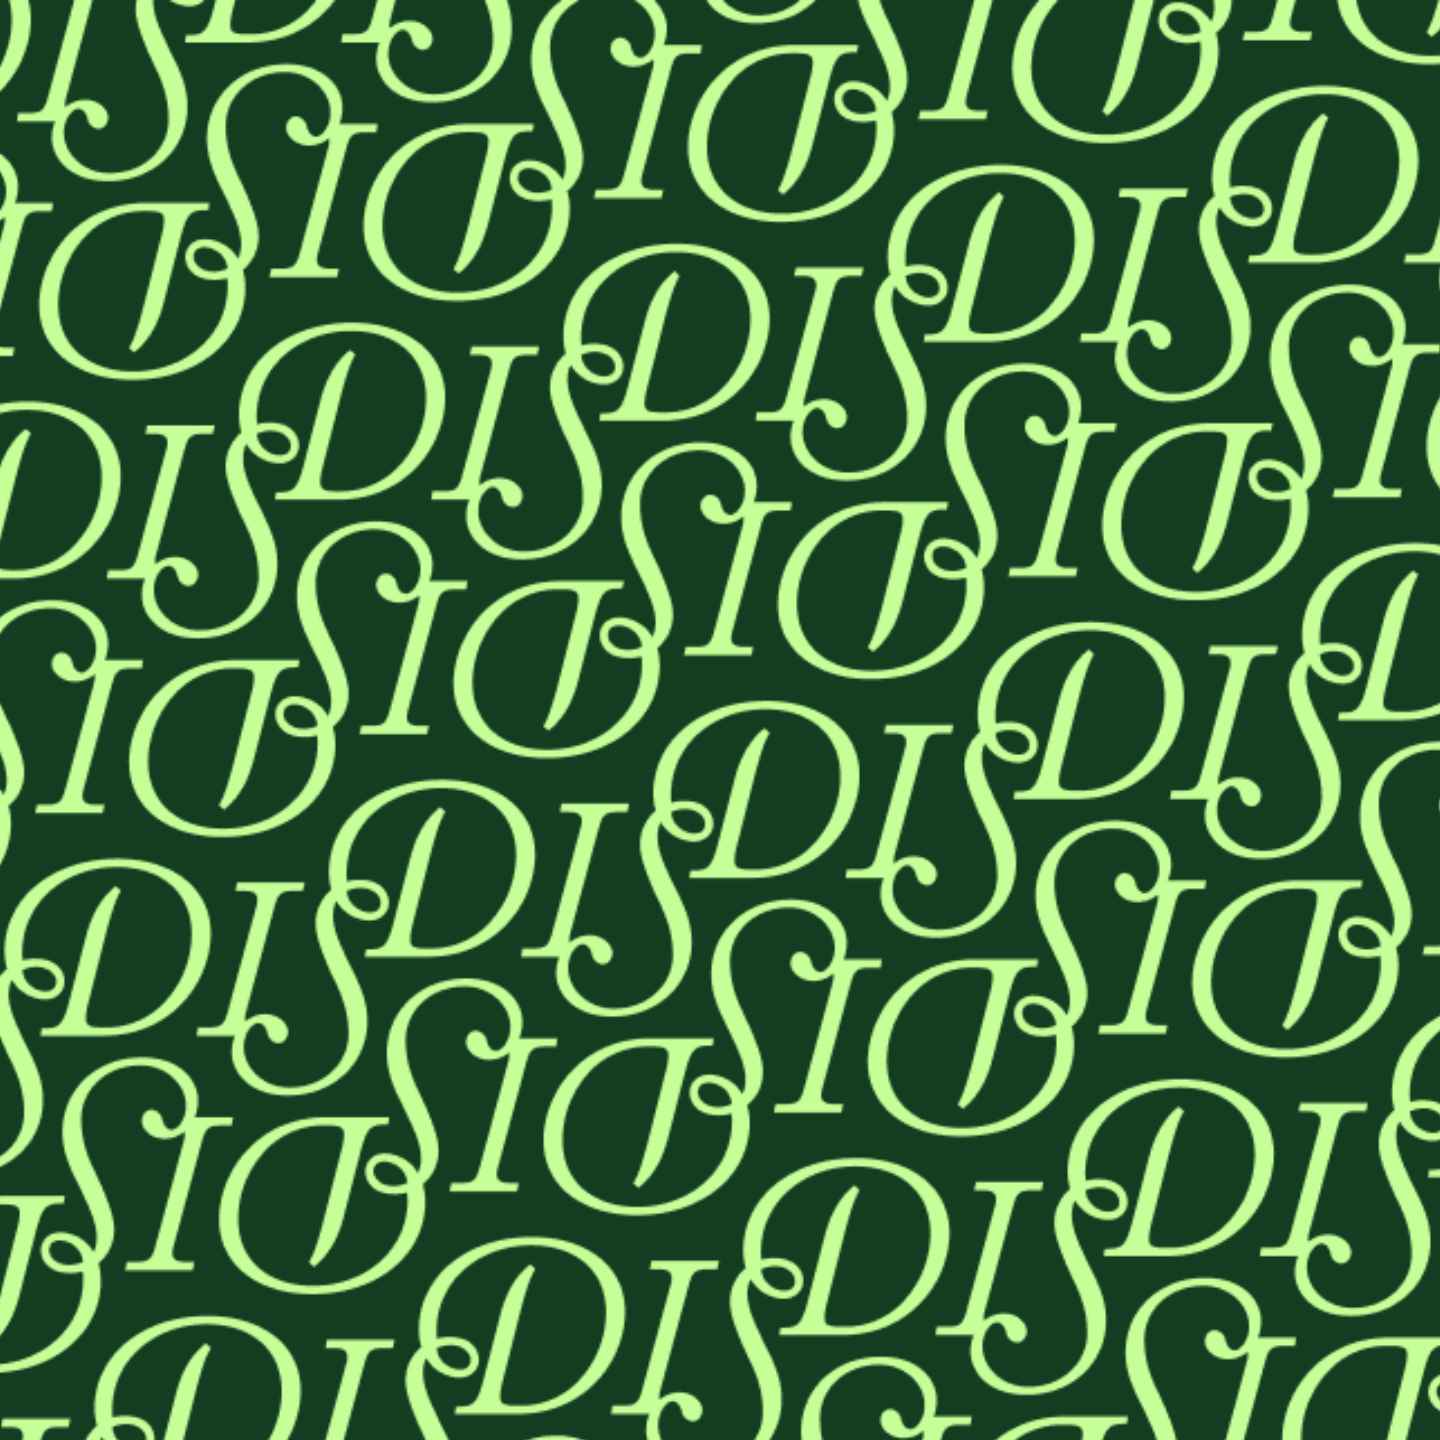 Green image with text "DIS" repeating in a lighter green